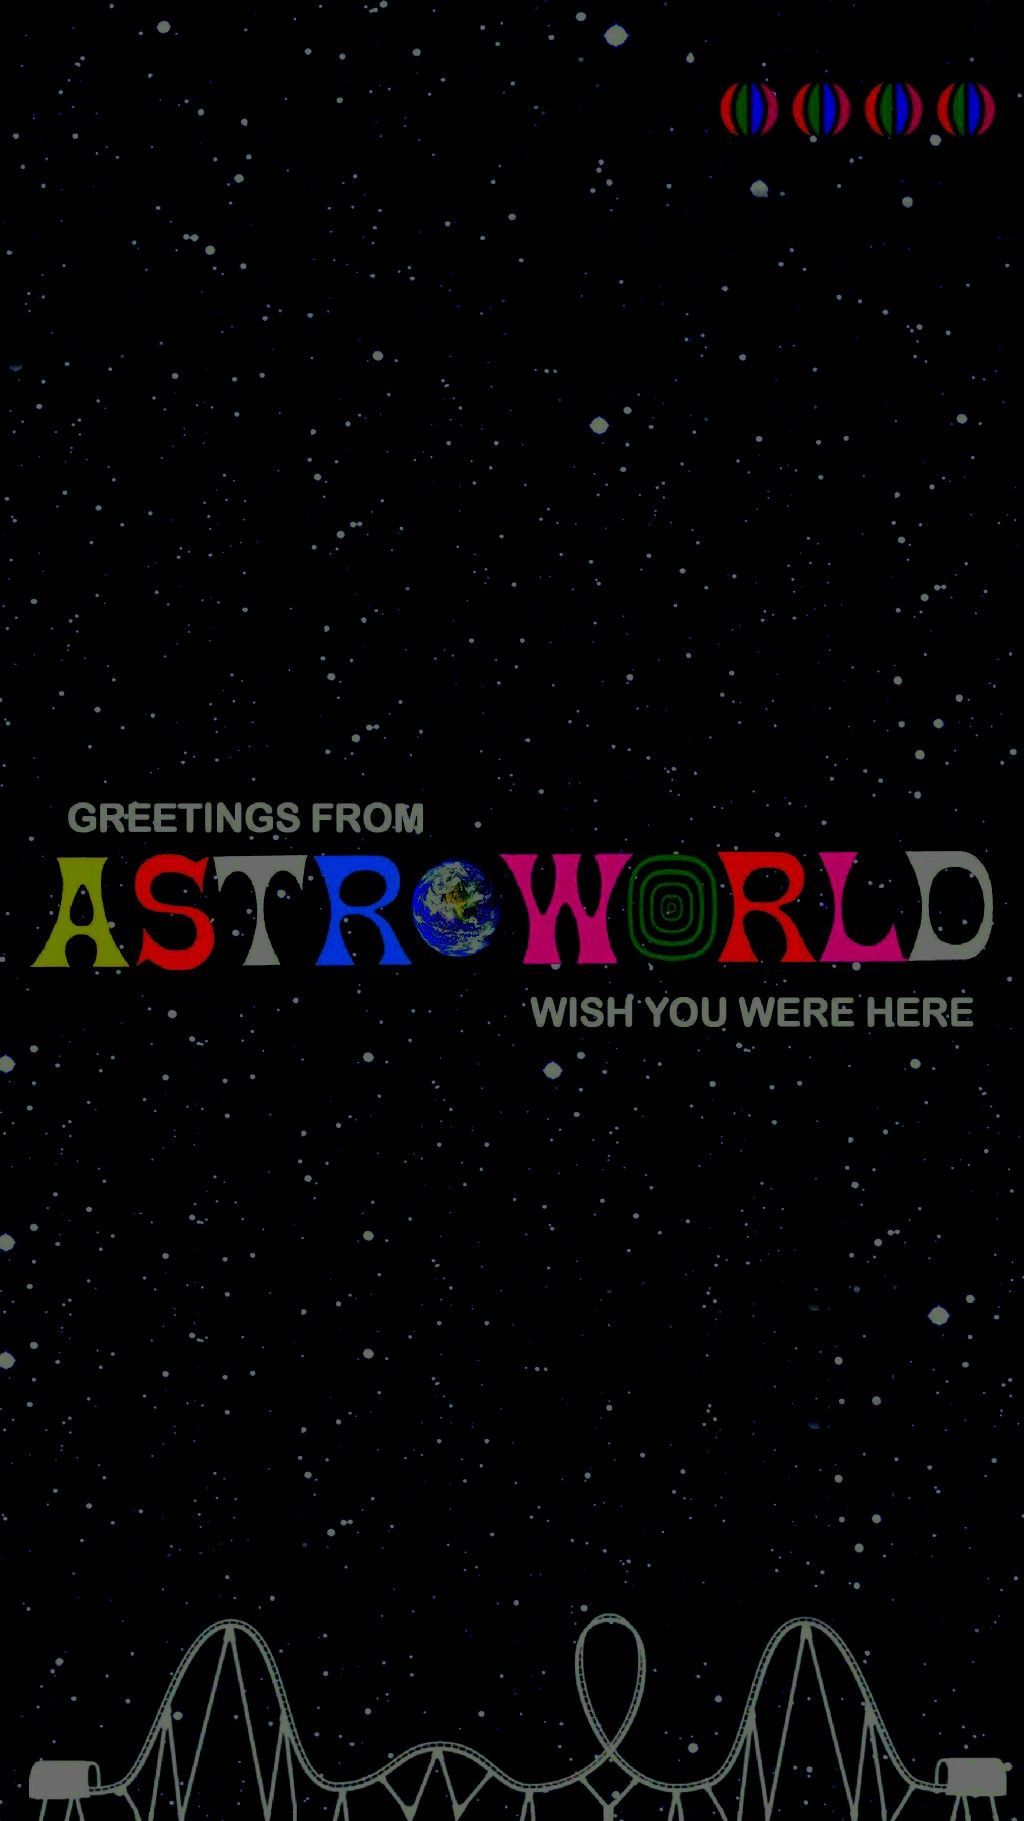 Aesthetic Astroworld Wallpapers - Wallpaper Cave